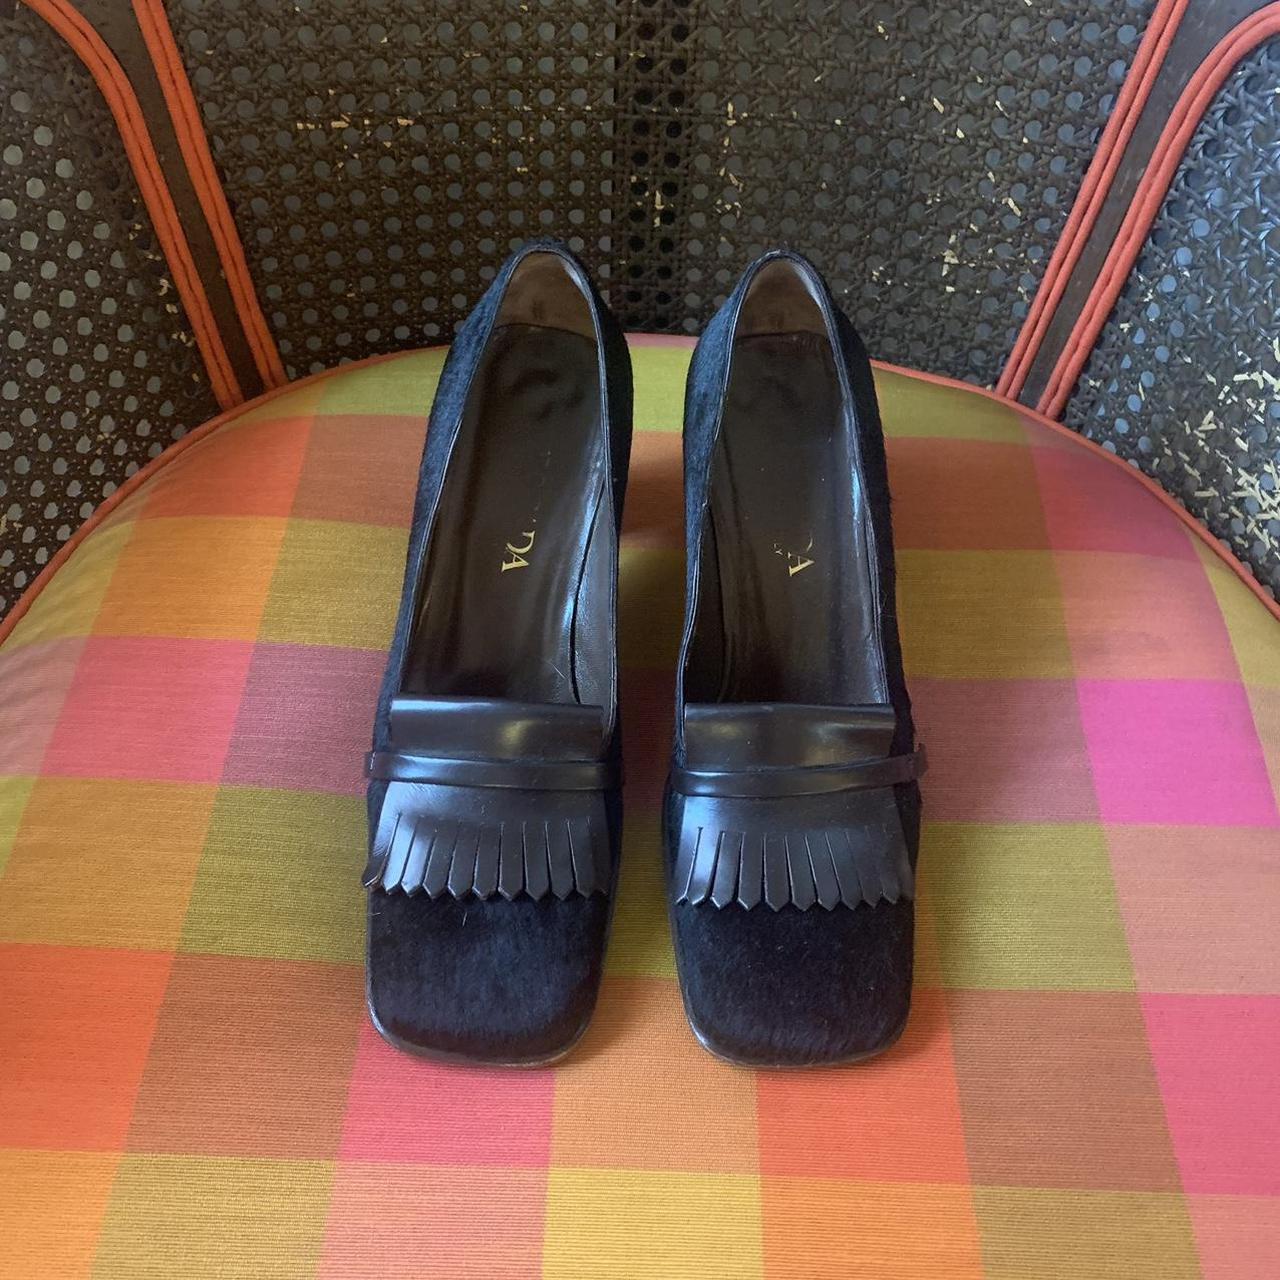 Escada Women's Black and Brown Loafers | Depop